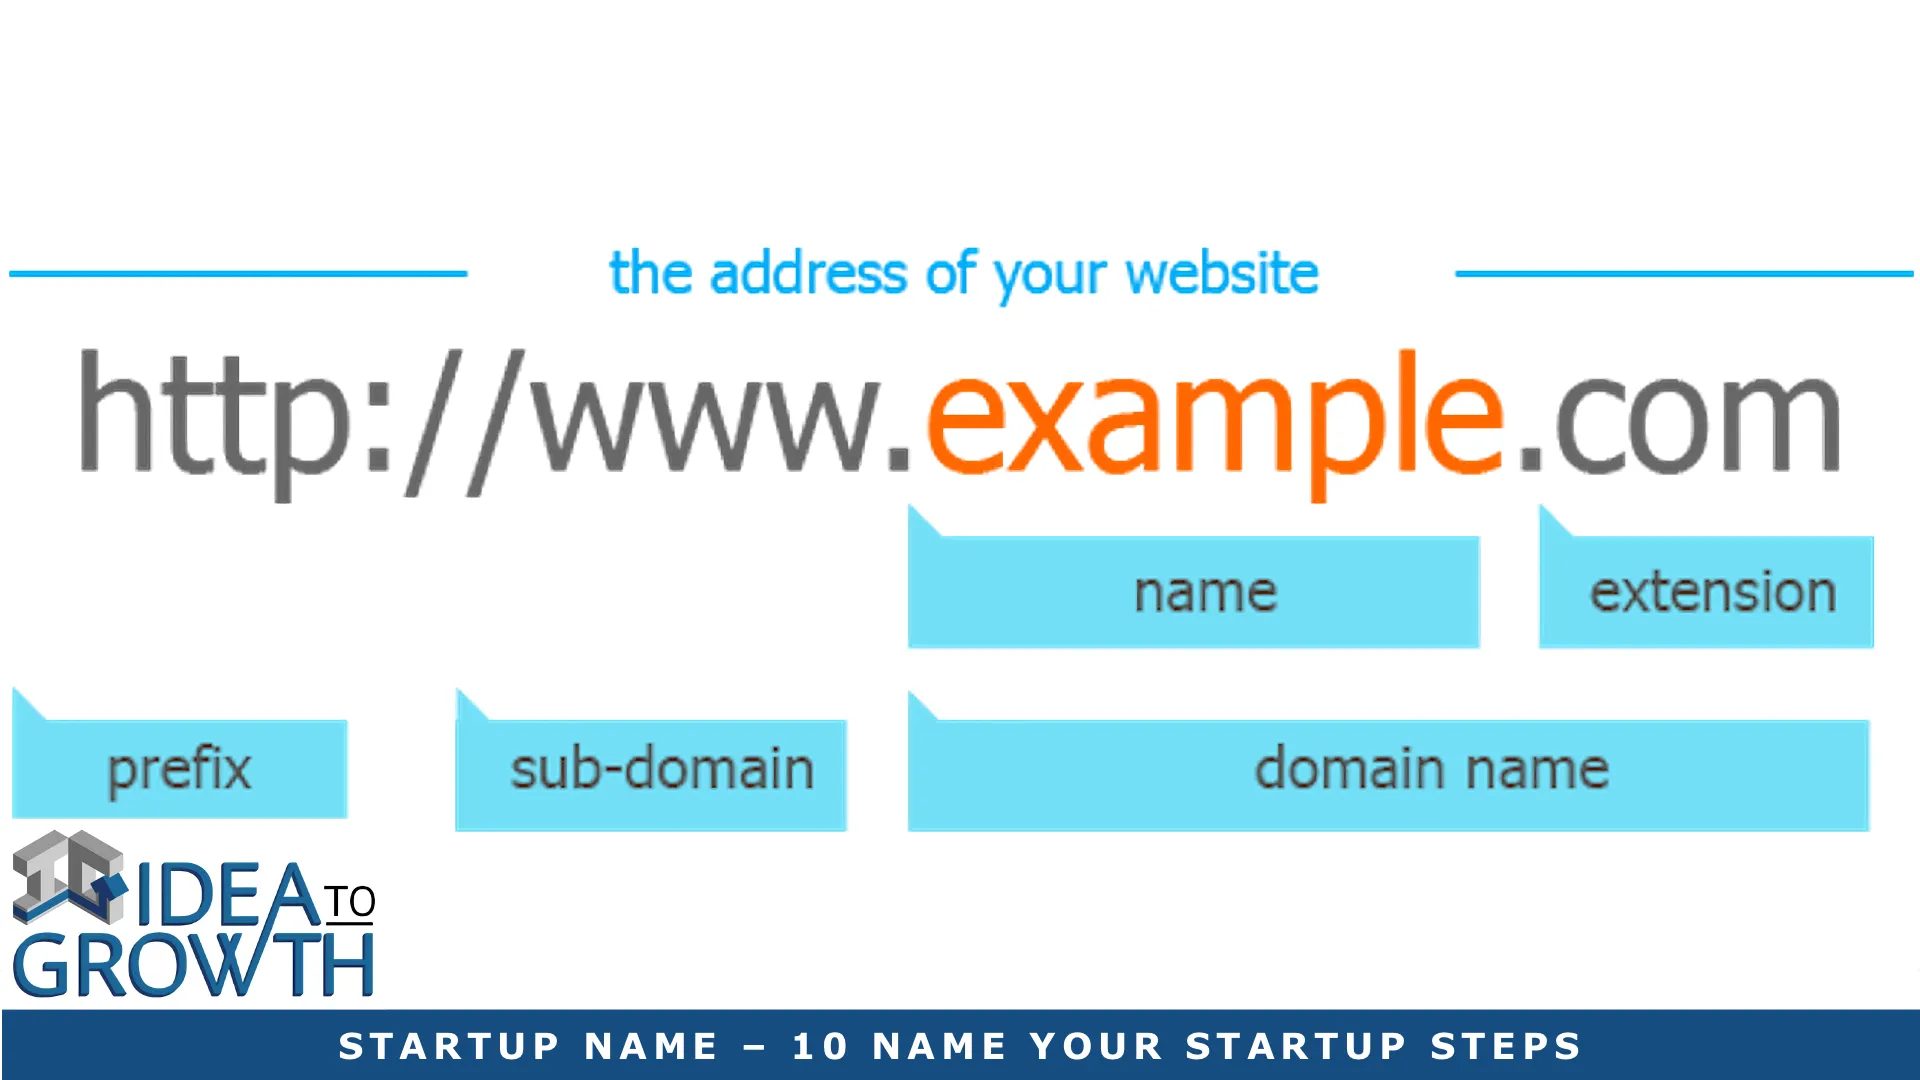 STARTUP NAME – 10 NAME YOUR STARTUP STEPS